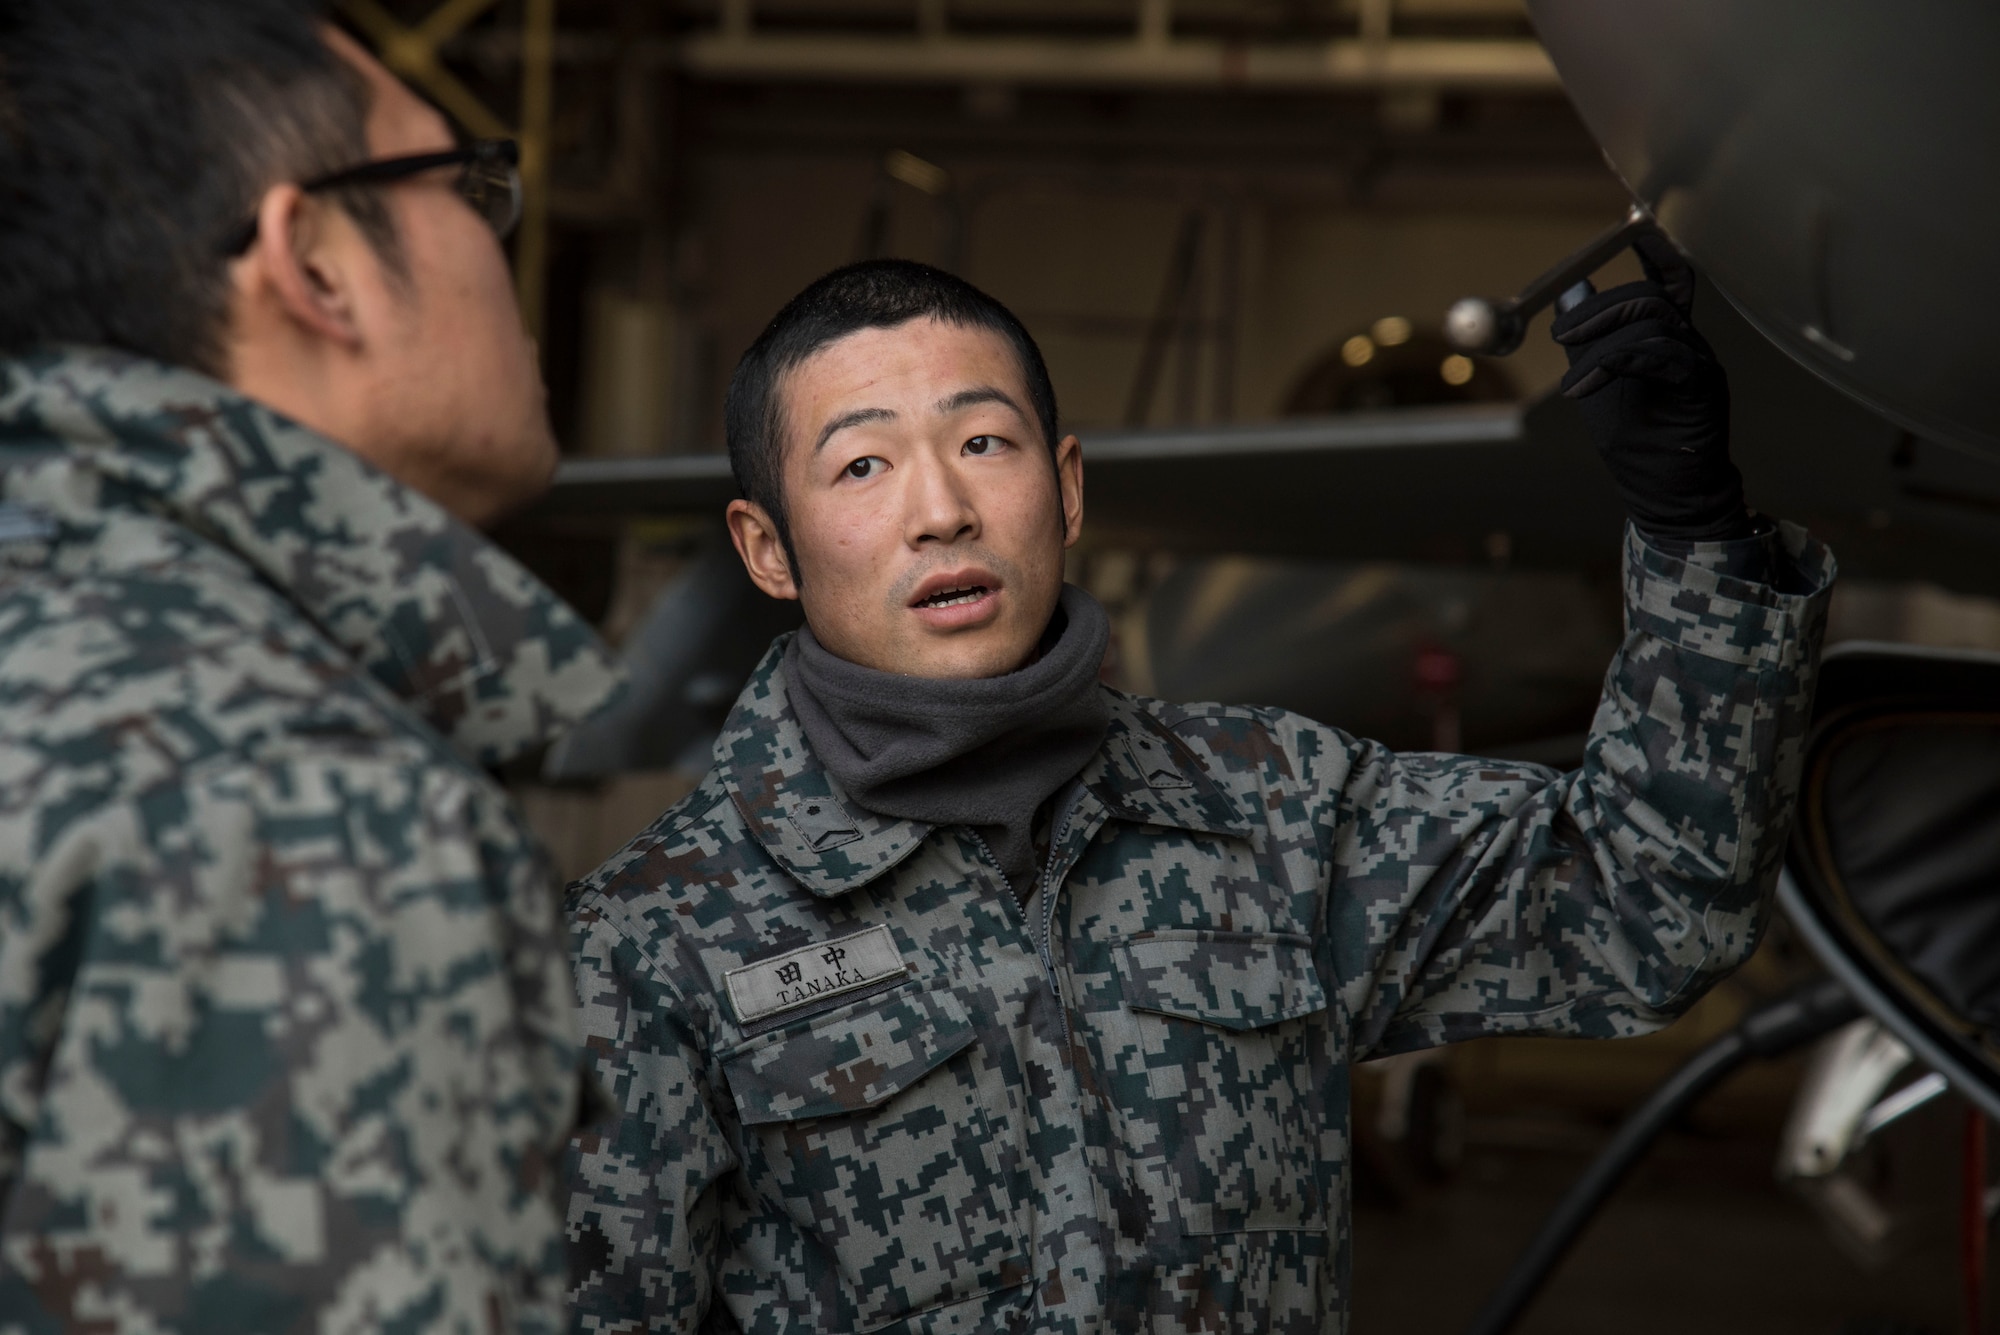 Japan Air Self-Defense Force Staff Sgts. Kenta Okazaki, left, and Narihito Tanaka, right, both 3rd Air Wing avionics technicians, discuss the proper aircraft procedures they would take for a downed aircraft at Misawa Air Base, Japan, Dec. 7, 2016. Airmen and JASDF service members participated in a bilateral exchange during a surge to gain insight on a deployed operations tempo. (U.S. Air Force photo by Airman 1st Class Sadie Colbert)